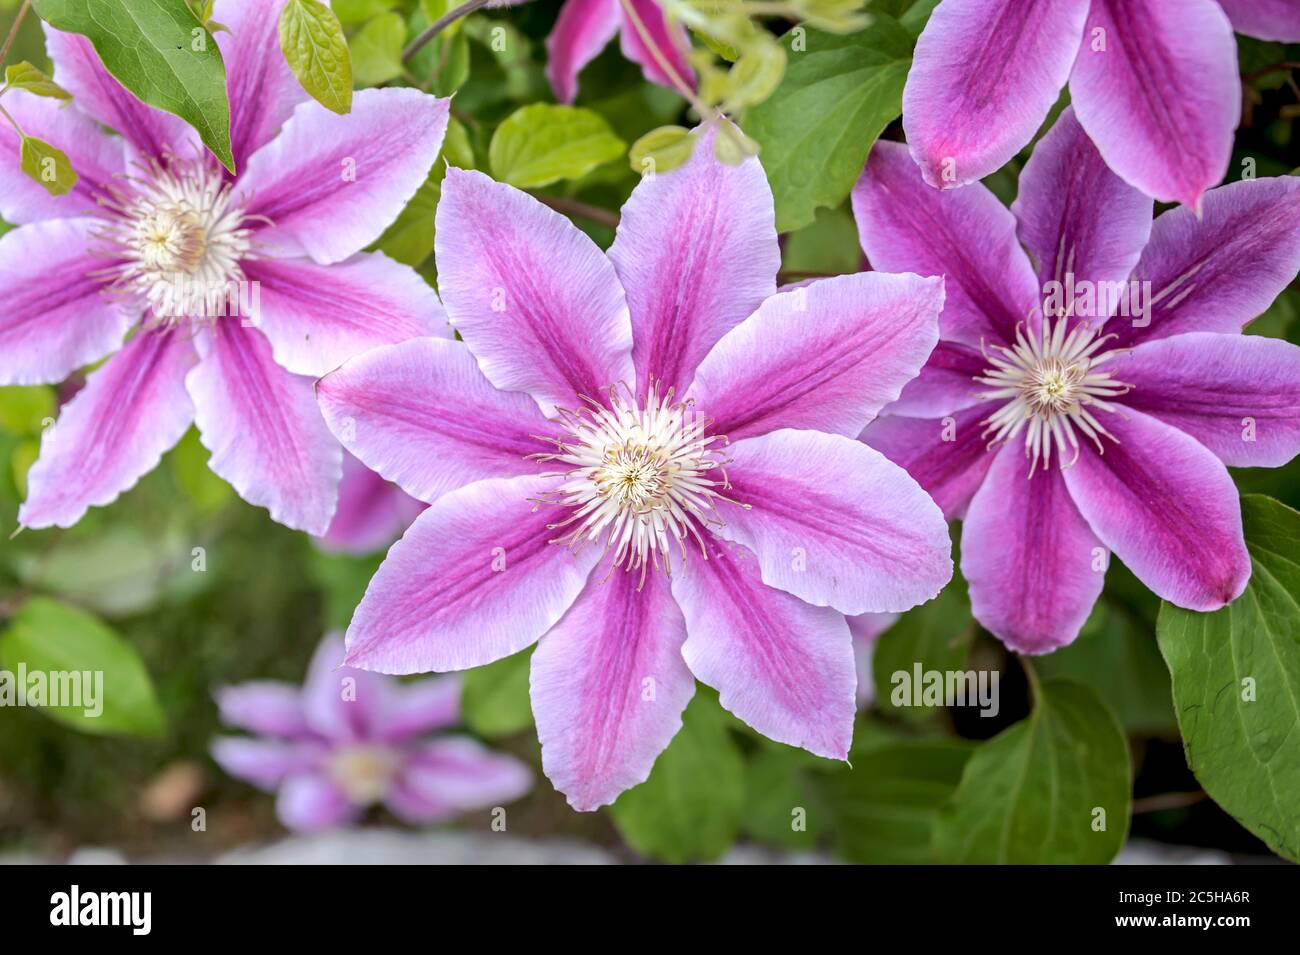 Waldrebe Clematis Dr Ruppel Stock Photo